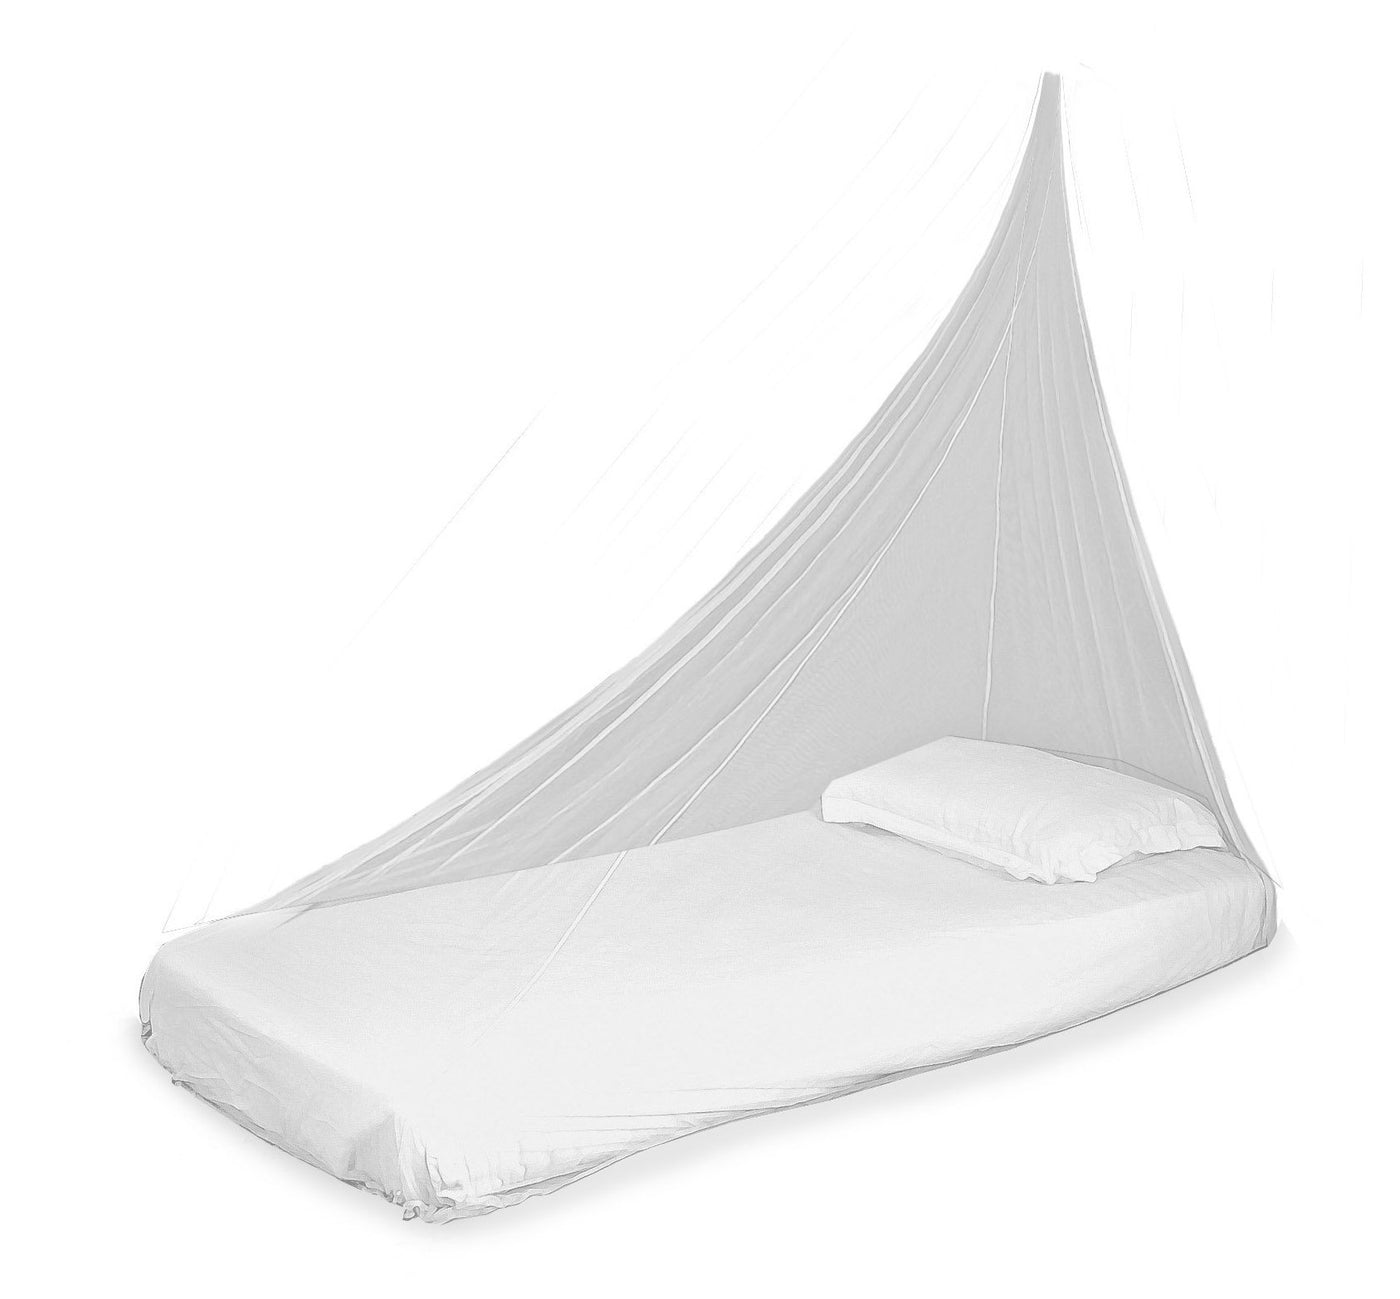 Lifesystems Superlight Single Mosquito Net | Insect Repellents | NZ